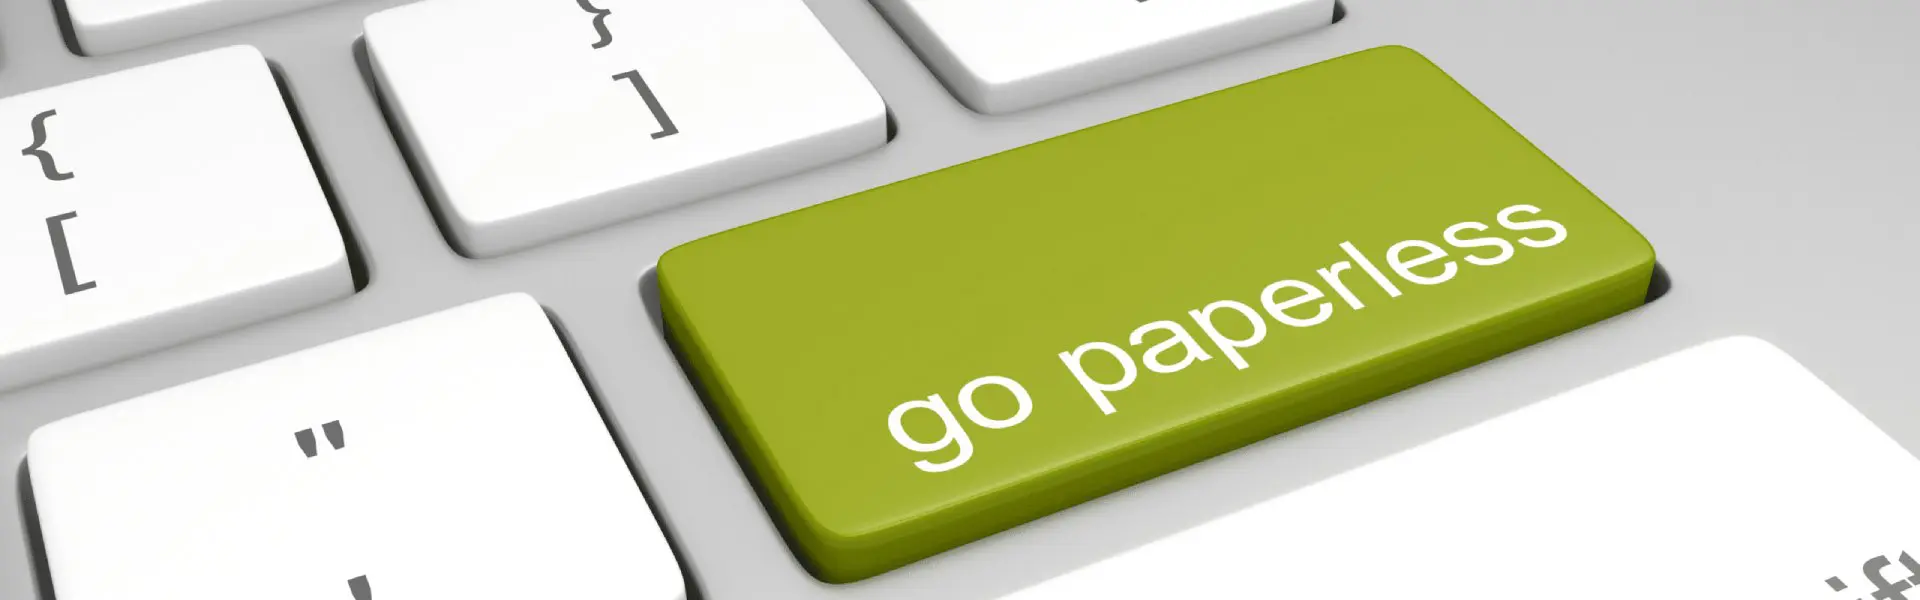 Go Paperless Key on a Computer Keyboard